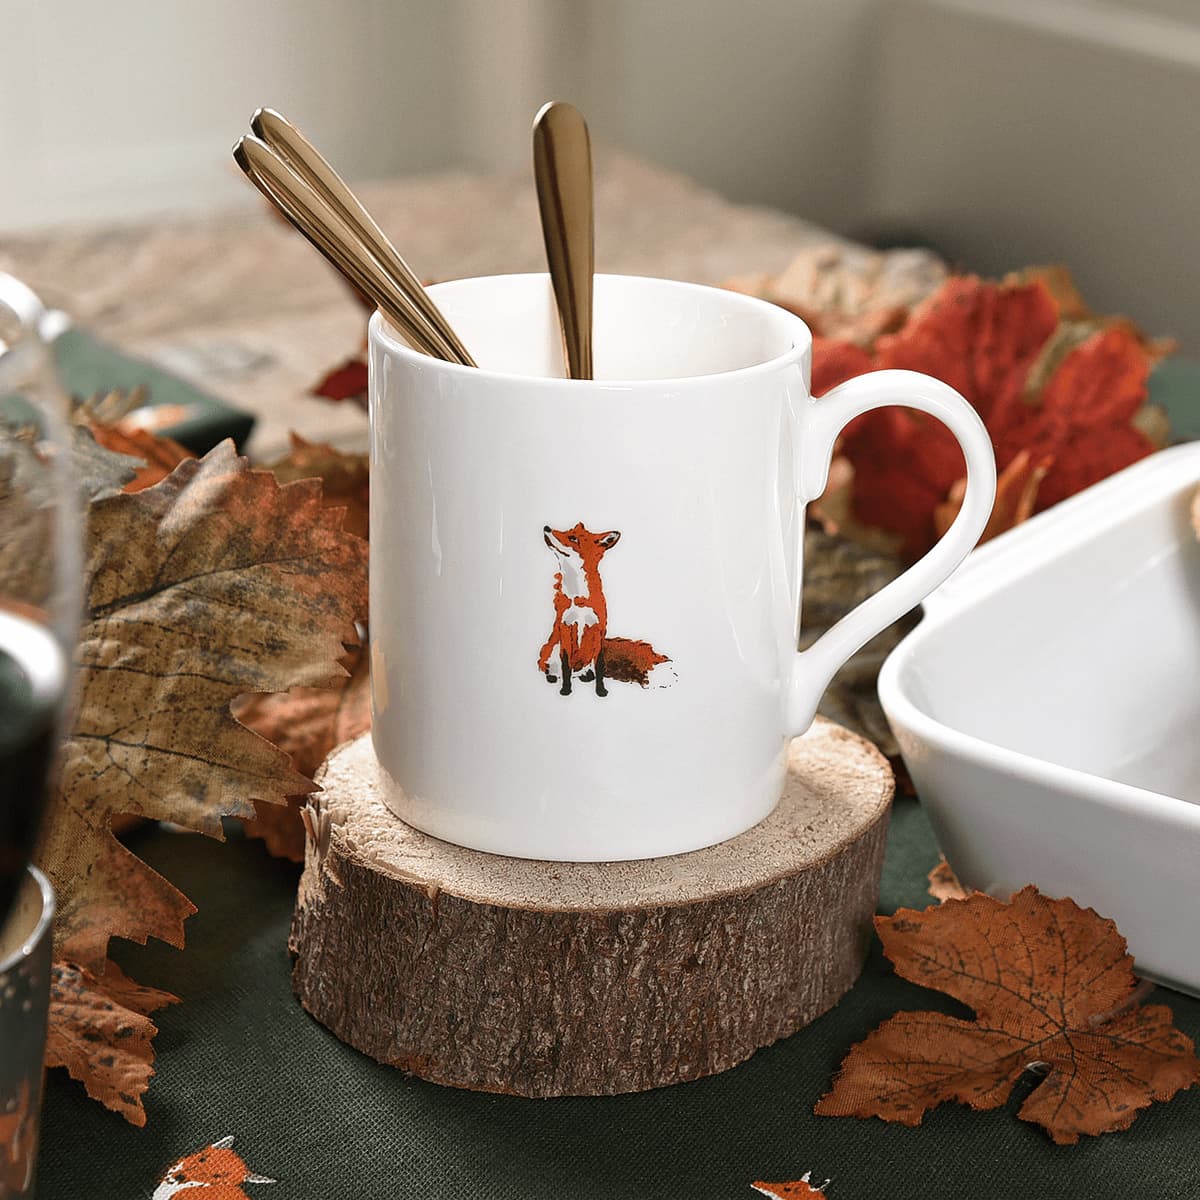 Foxes Solo Mug by Sophie Allport